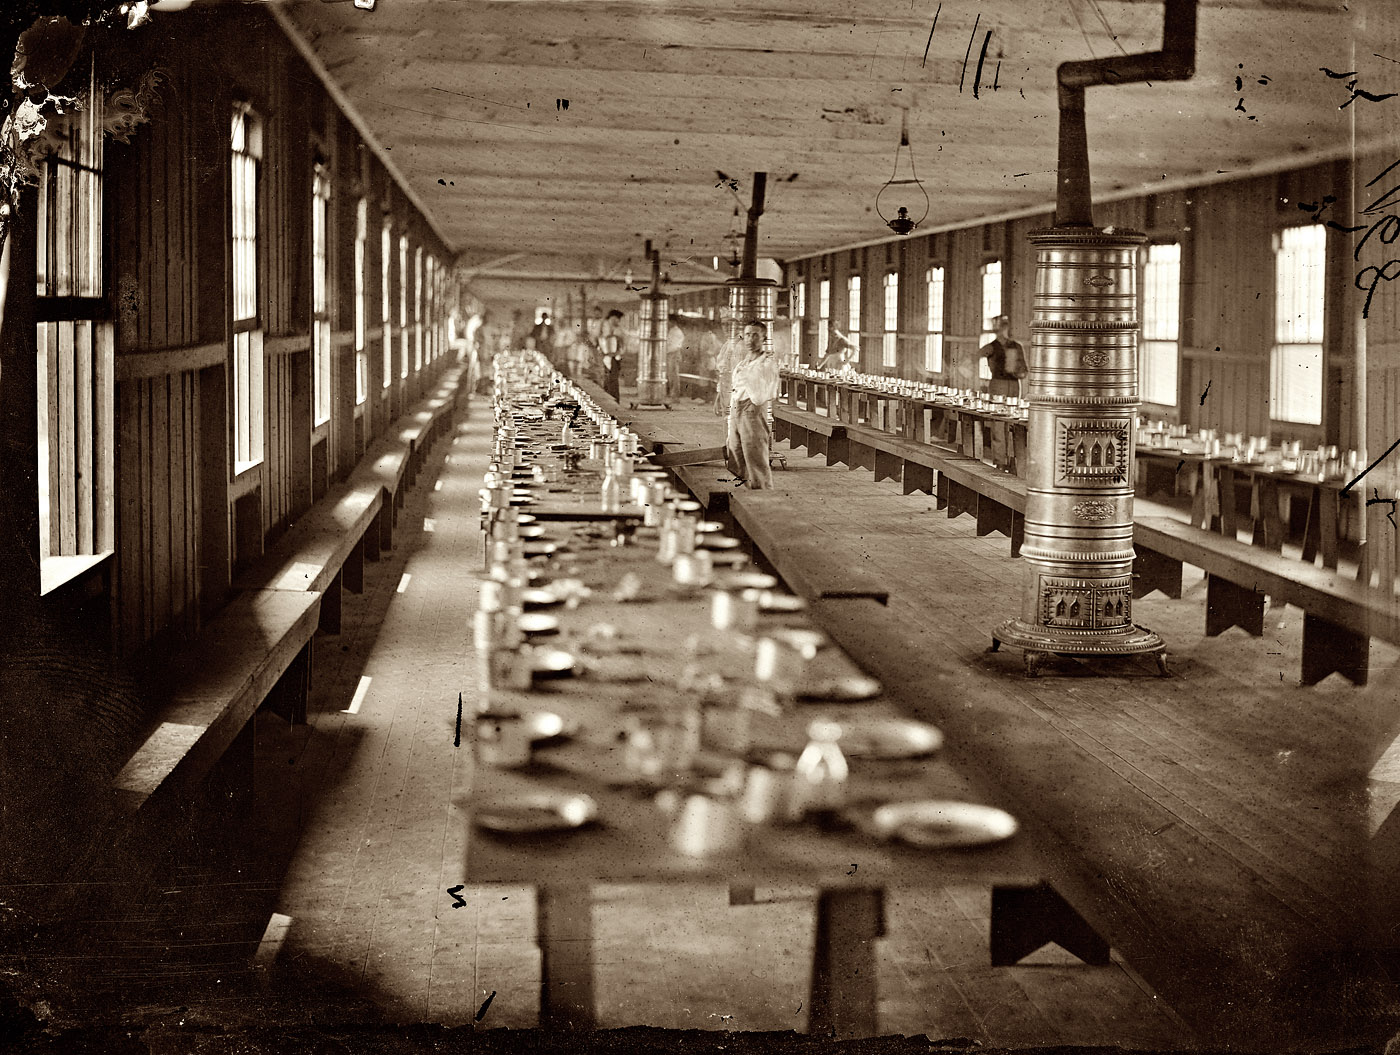 Washington circa 1863. "Mess hall at Harewood Hospital, heated by elaborate stoves." 3x4 glass-plate stereograph, photographer unknown. View full size.